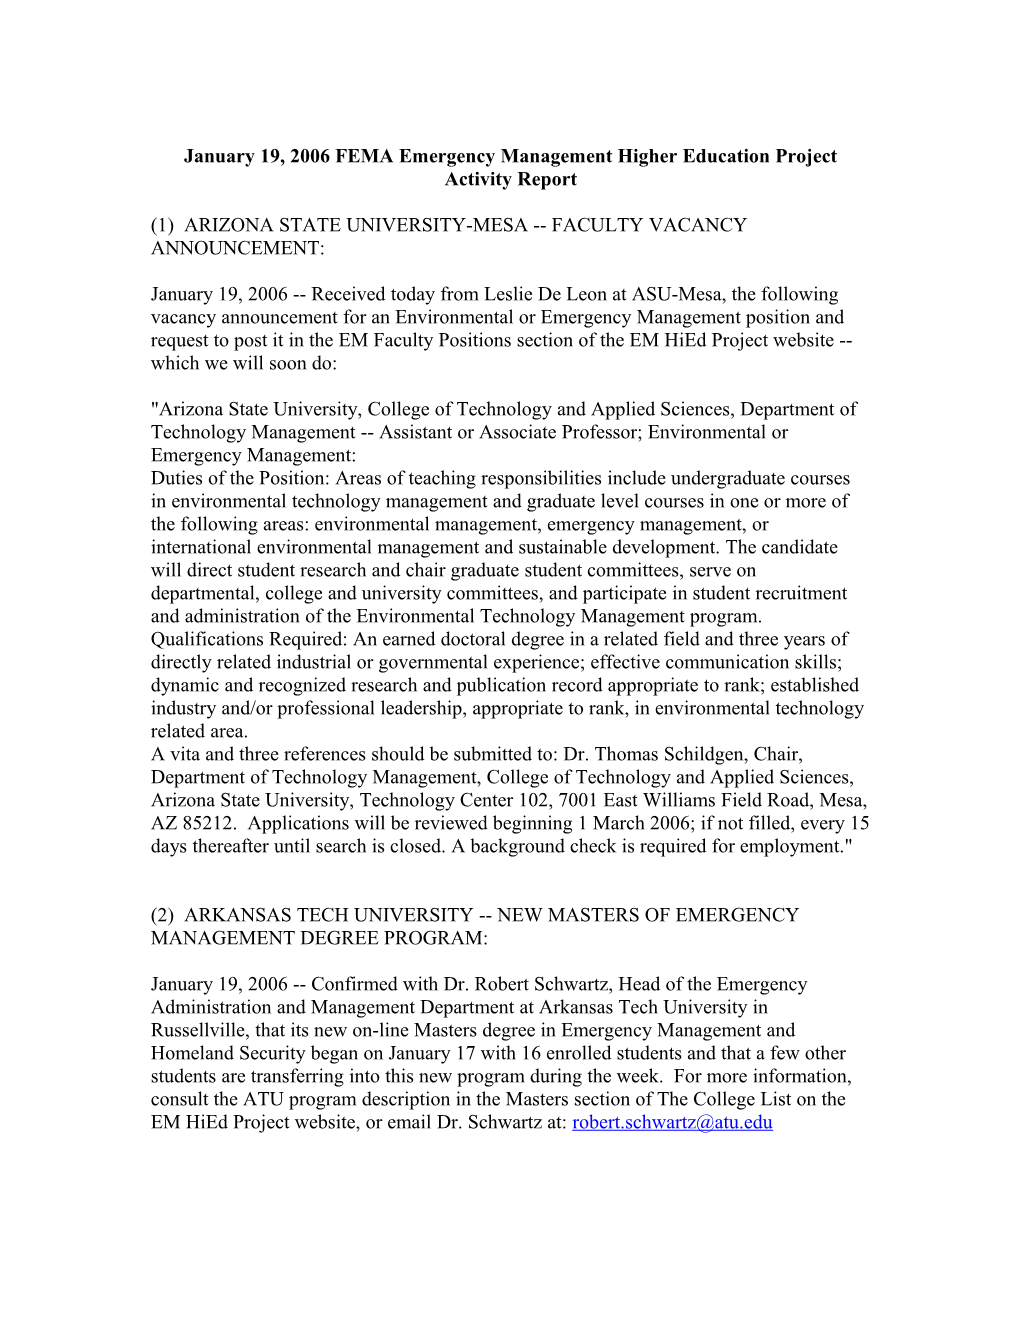 January 19, 2006 FEMA Emergency Management Higher Education Project Activity Report